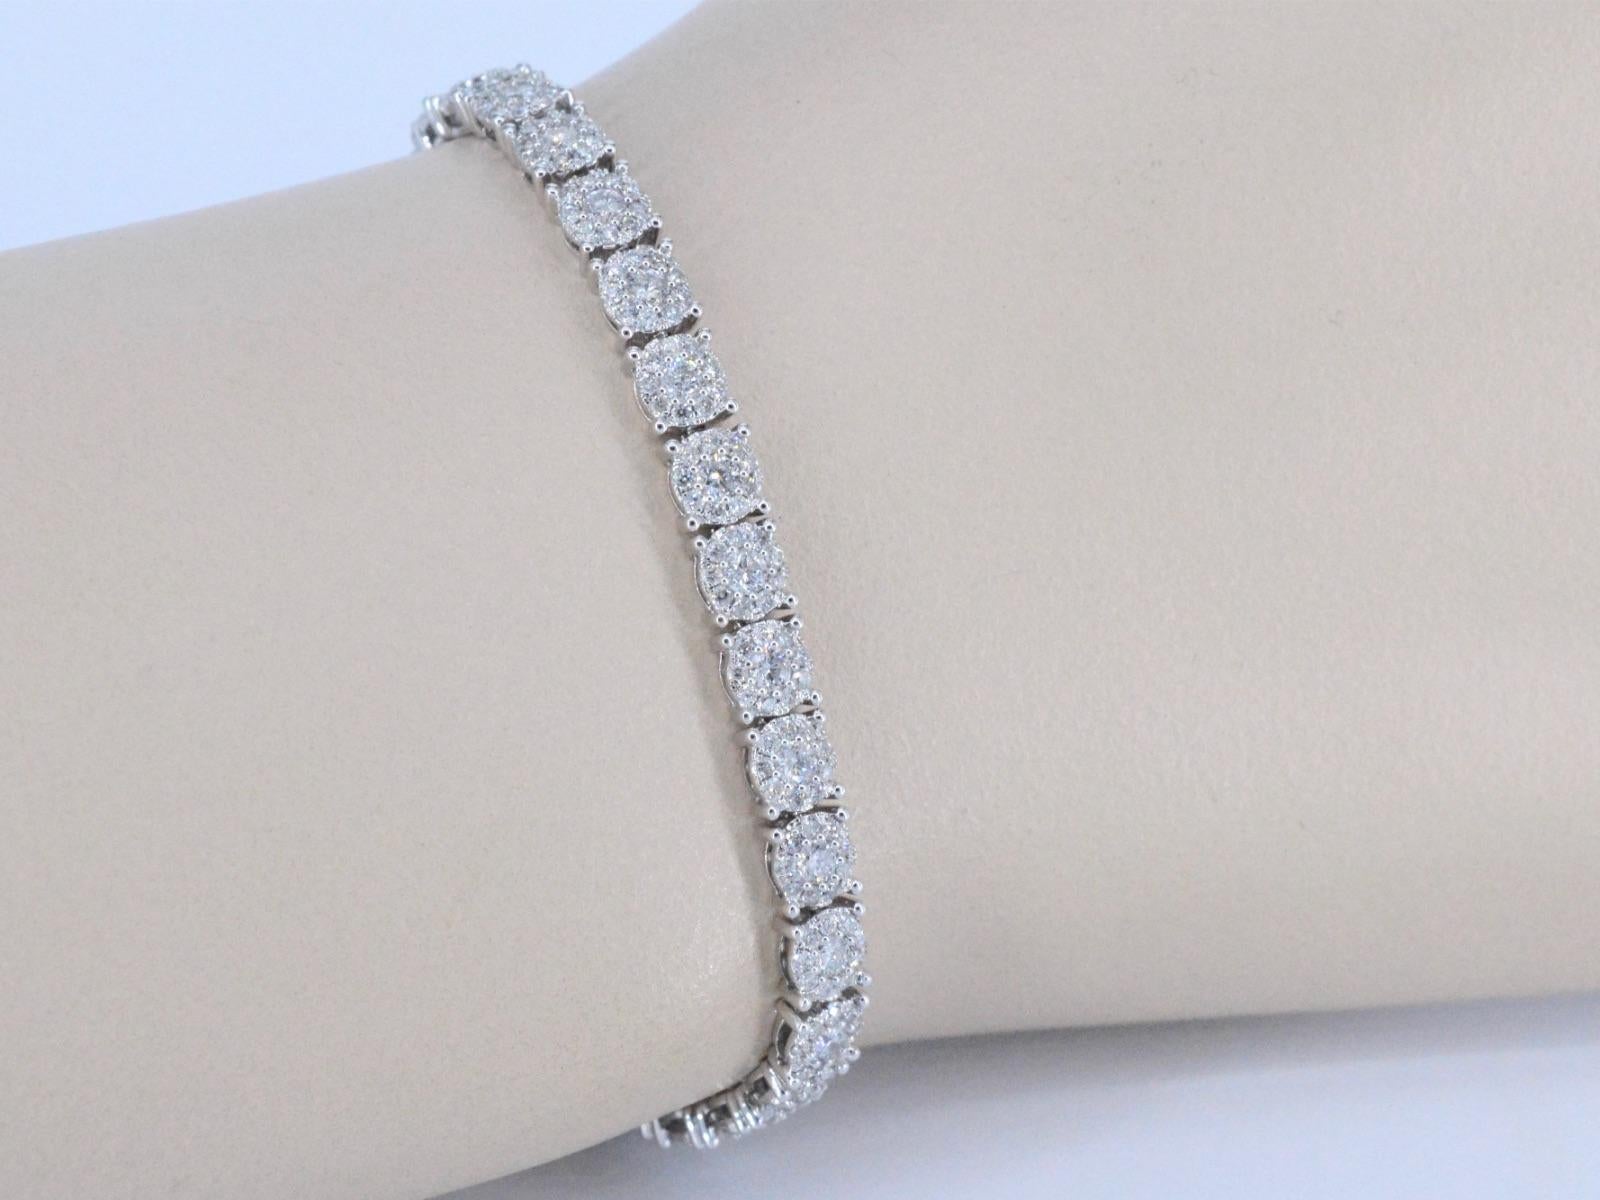 Introducing the stunning White Gold Tennis Bracelet with 5.50 Carat Diamonds. Crafted with exceptional quality, this bracelet boasts a brilliant cut, F-G color, and SI-P clarity diamonds that total 5.50 carats in weight. The 18 karat white gold